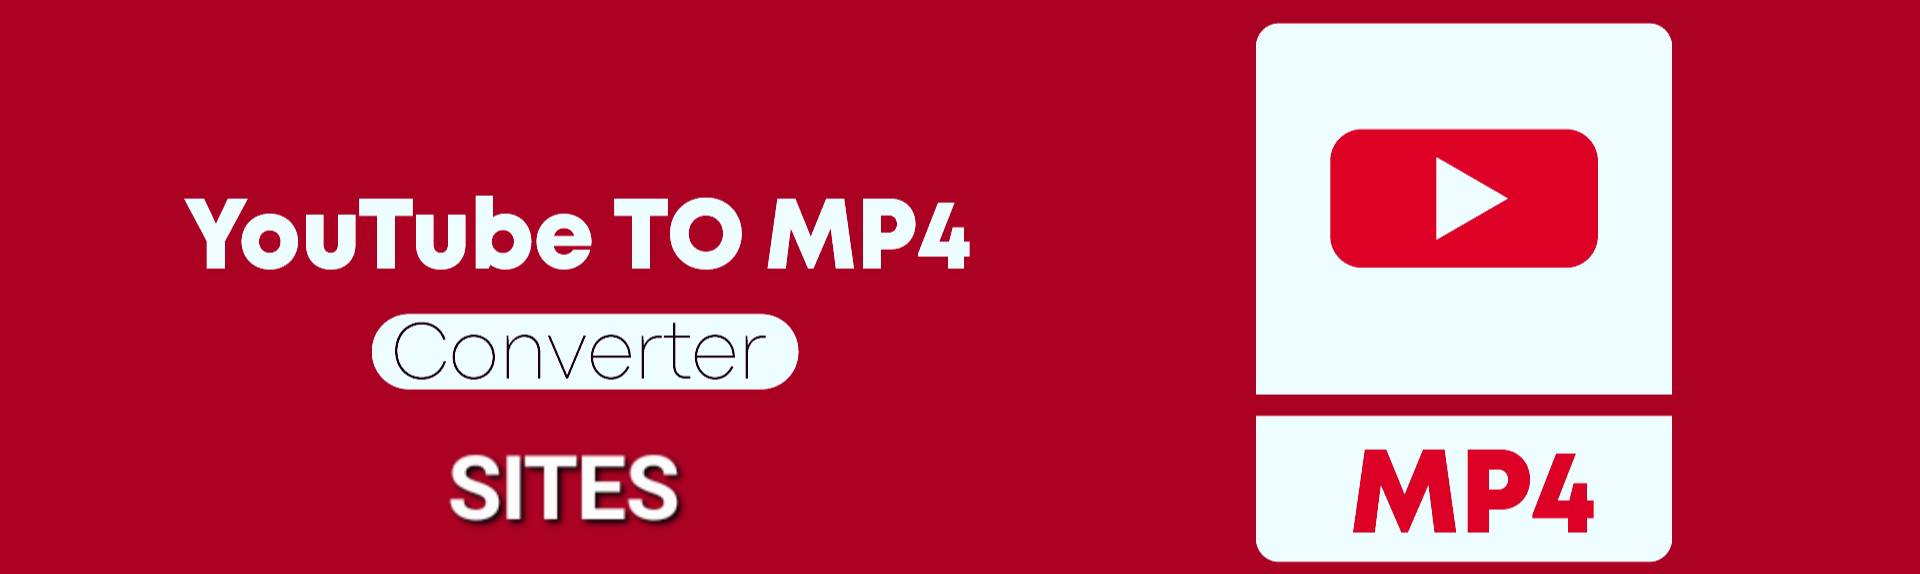 YouTube to MP4 Downloader Sites